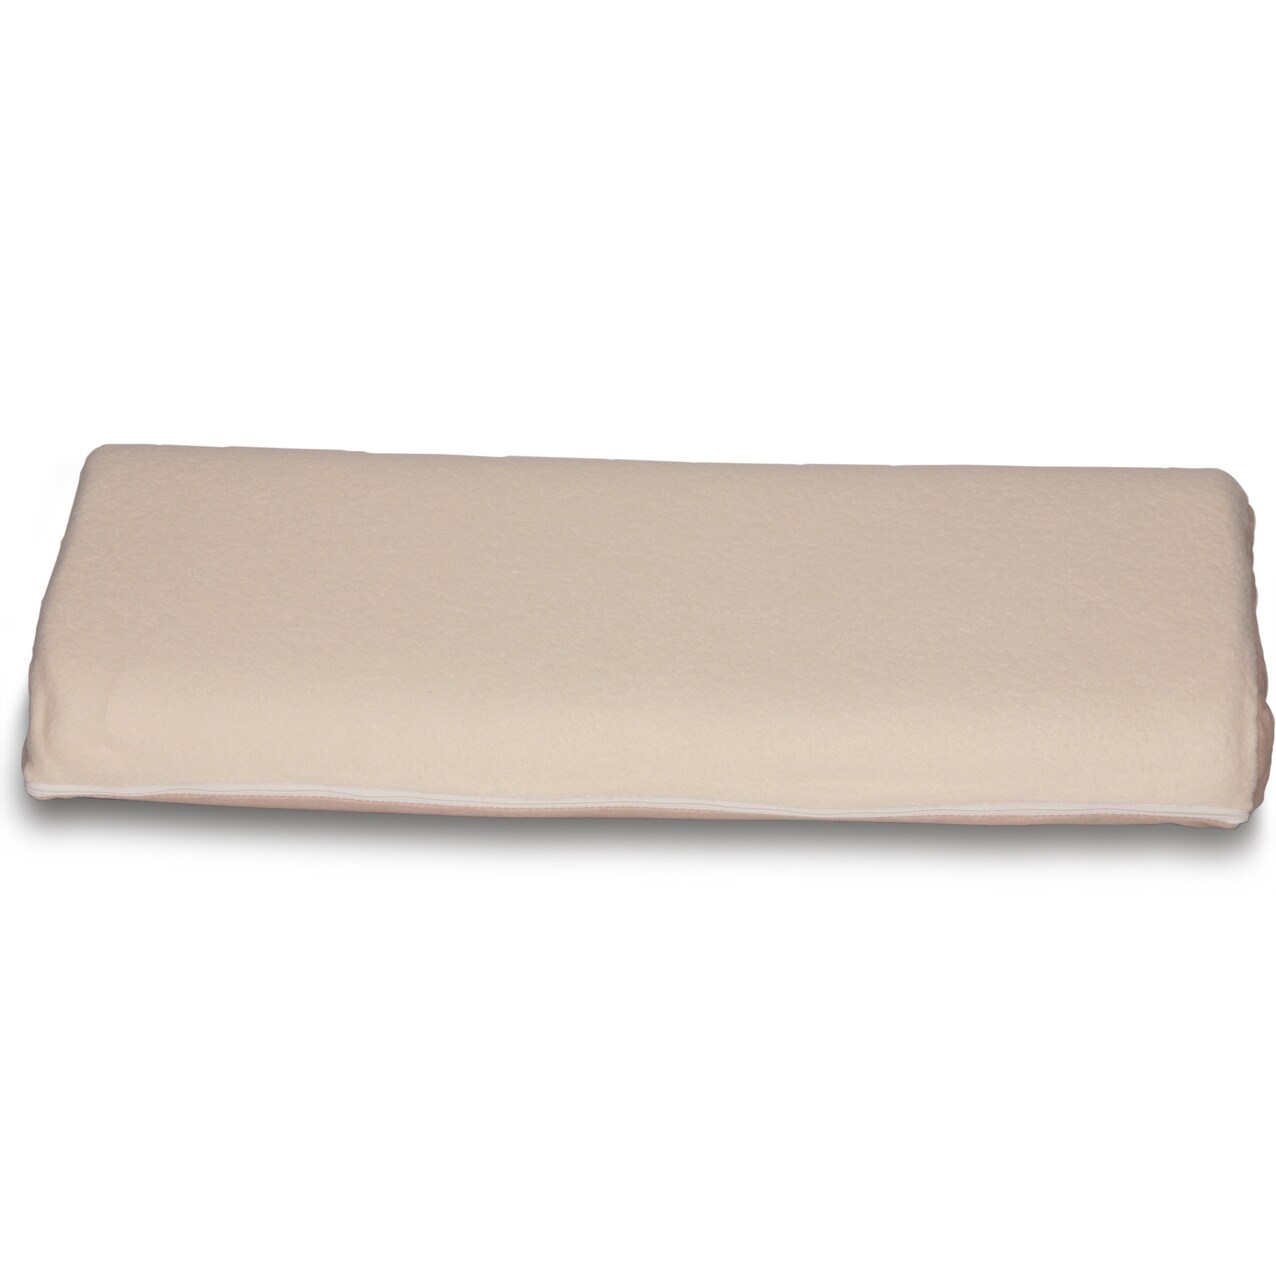 Sloped Knee Lift, 24 x 20 x 6.5 - Tailbone Support - Leg Positioner  Pillow - On Sale - Bed Bath & Beyond - 34663861